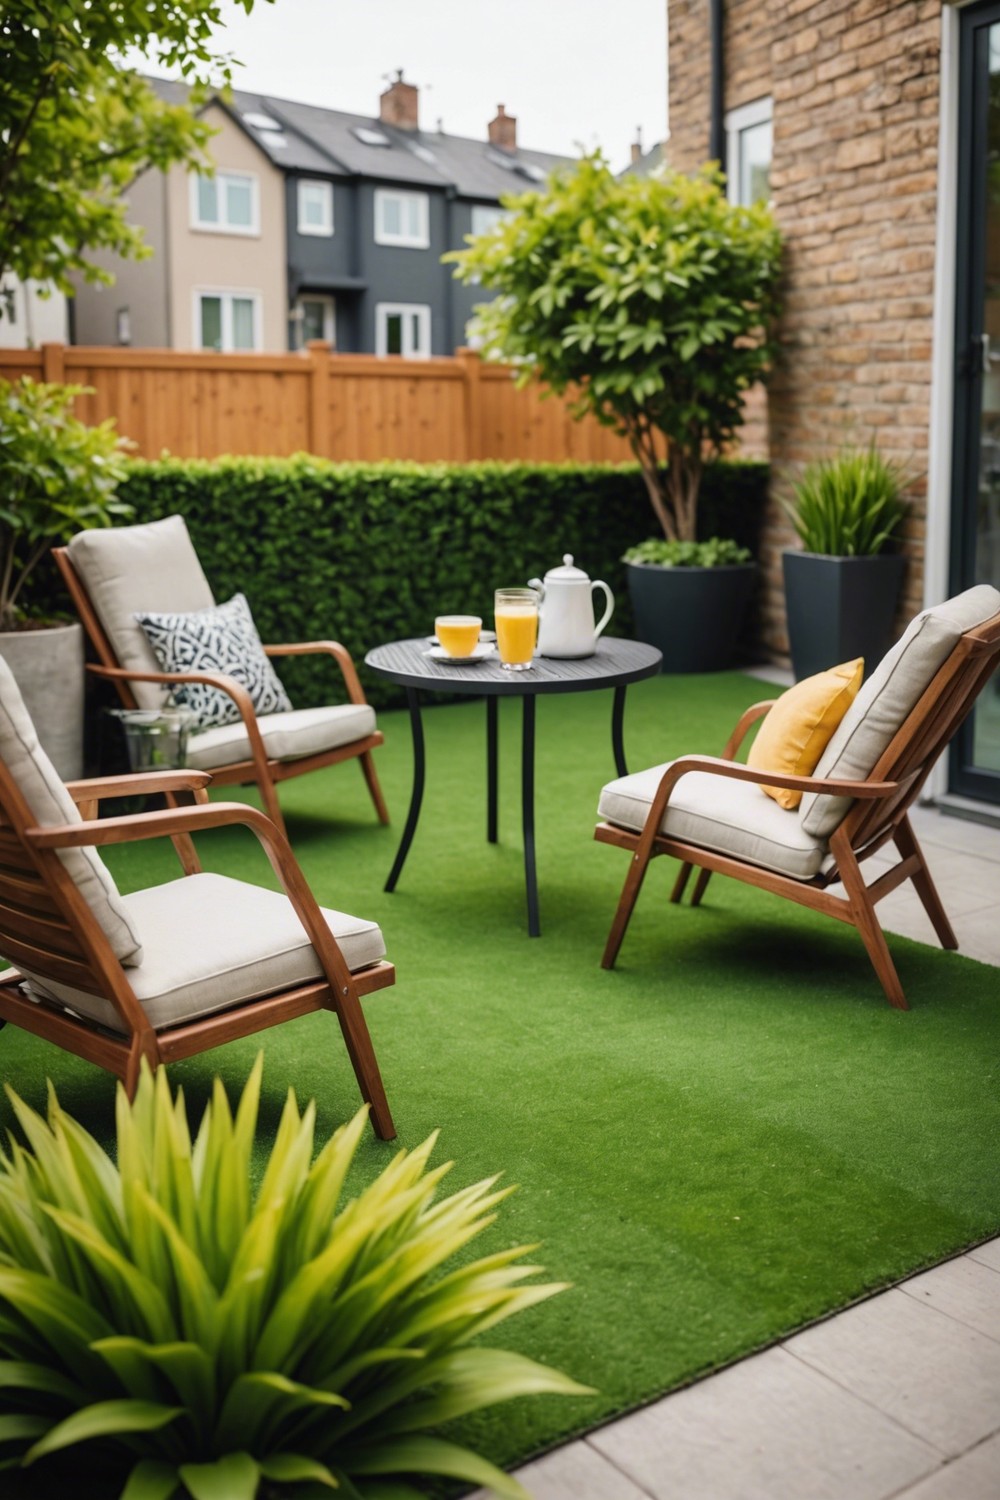 Artificial Turf for a Lush Look